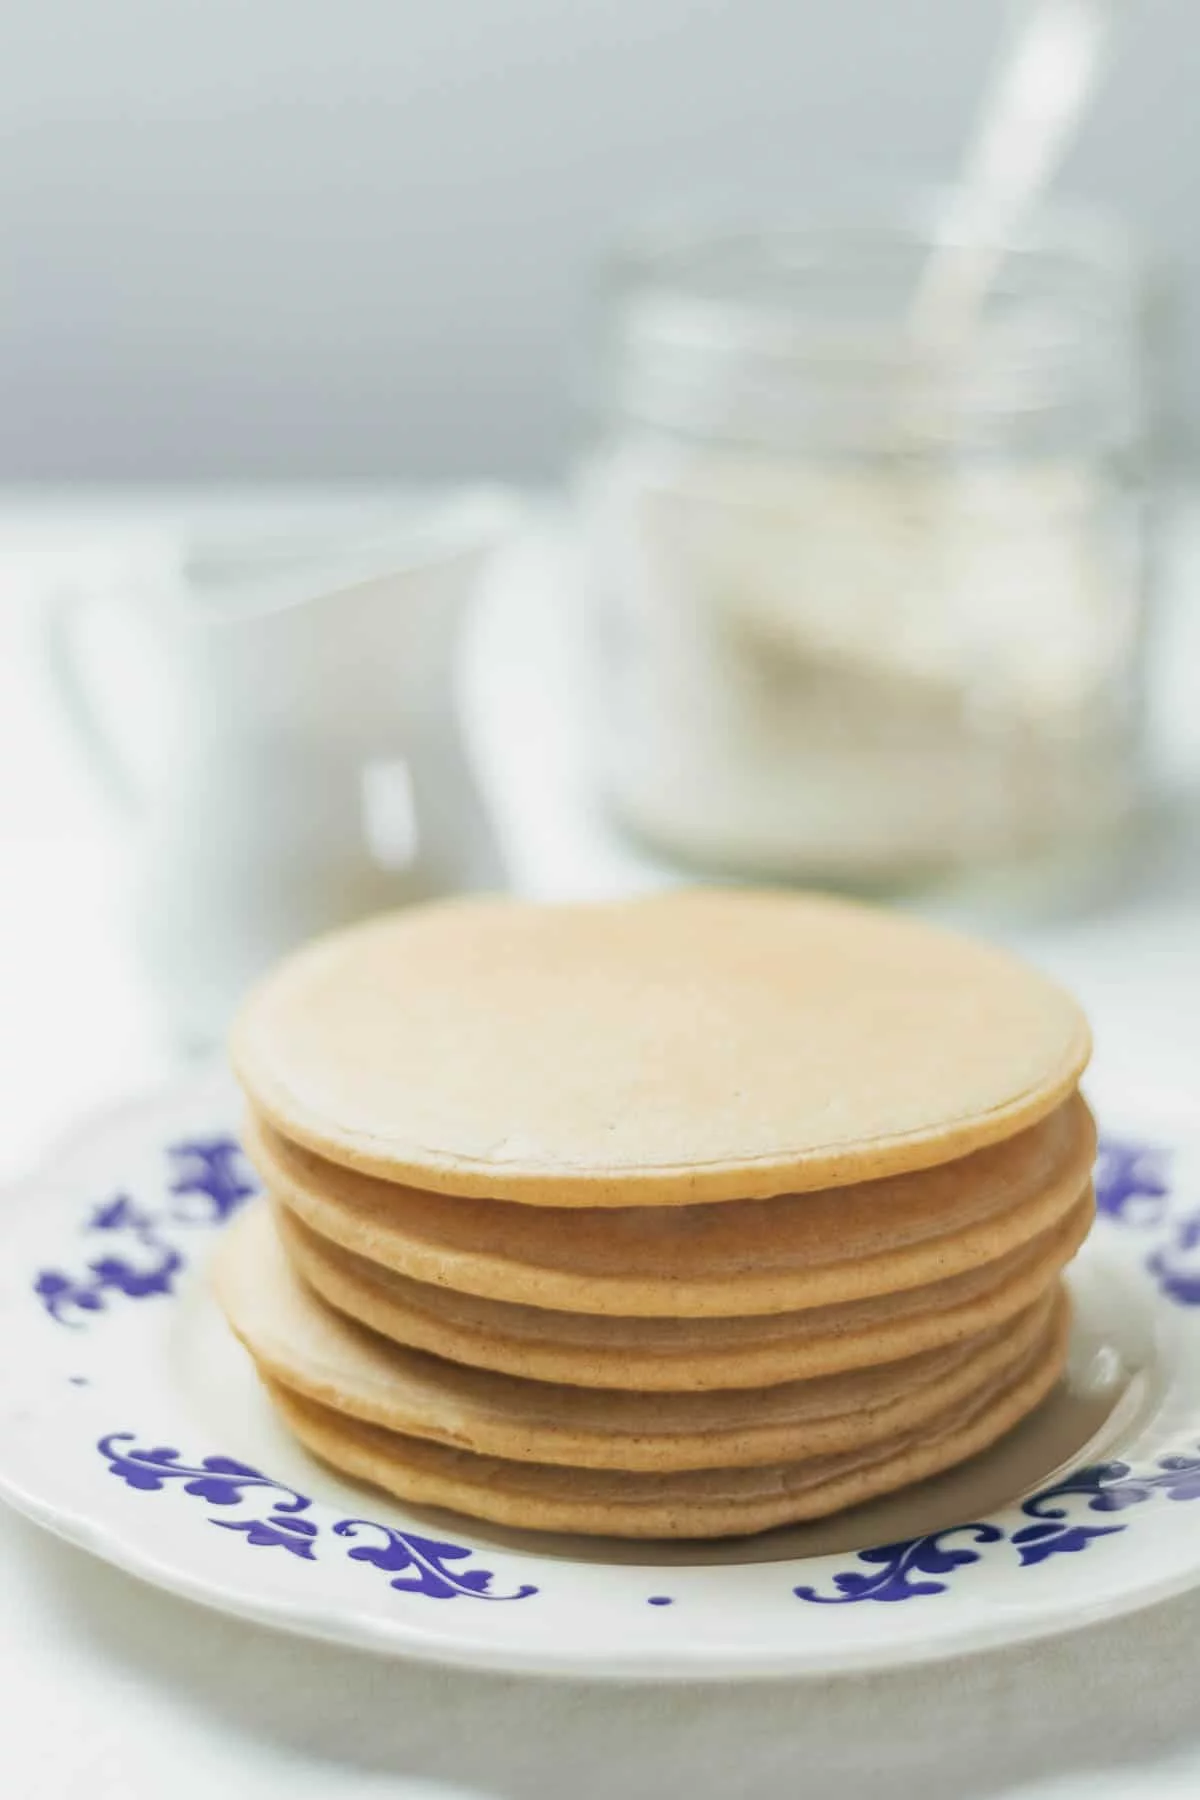 Only 4 Ingredients and Oatmeal Flour Fluffy Pancakes Recipe